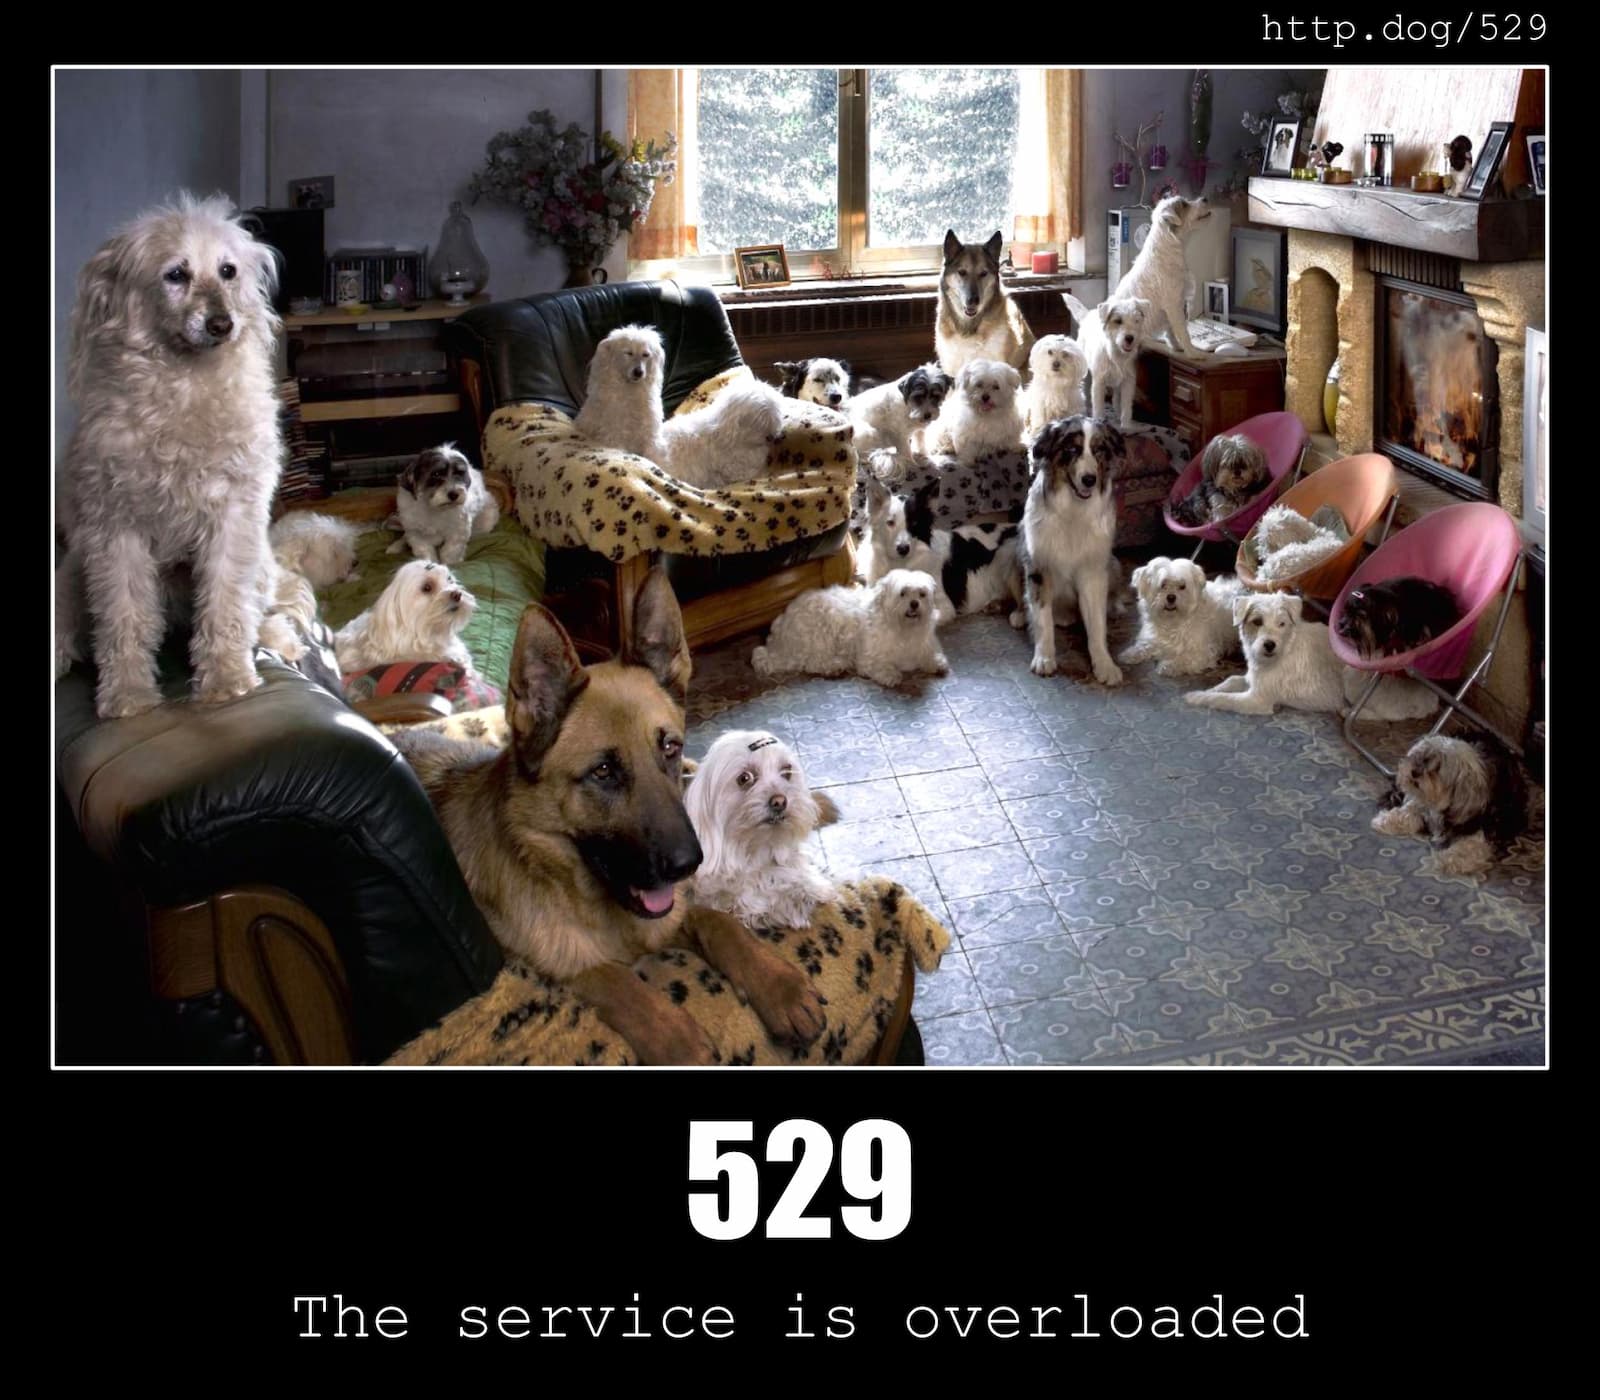 HTTP Status Code 529 The service is overloaded & Dogs